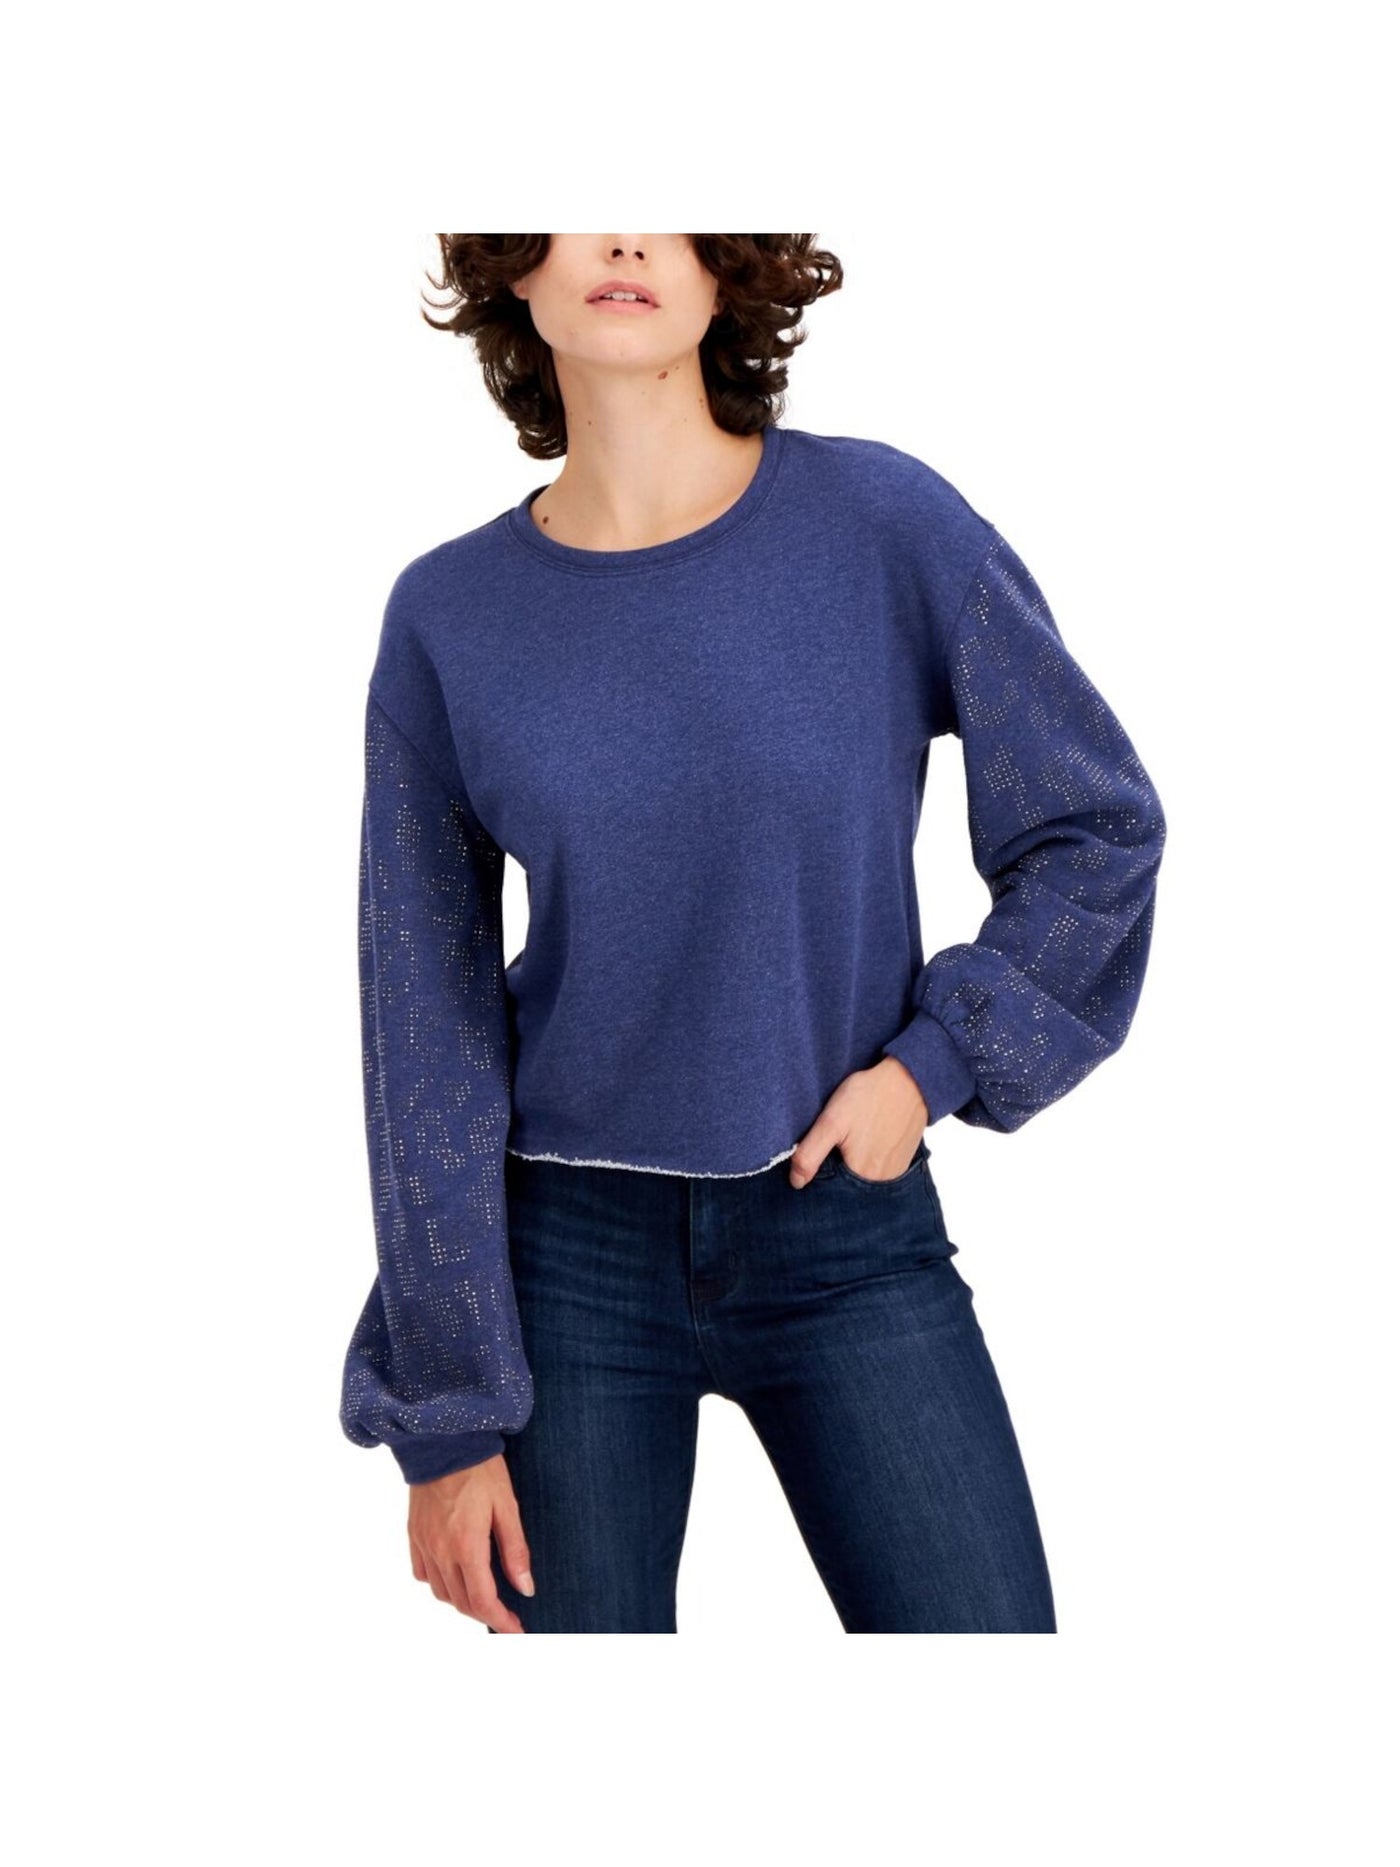 INC Womens Navy Sequined Long Sleeve Jewel Neck Sweater S